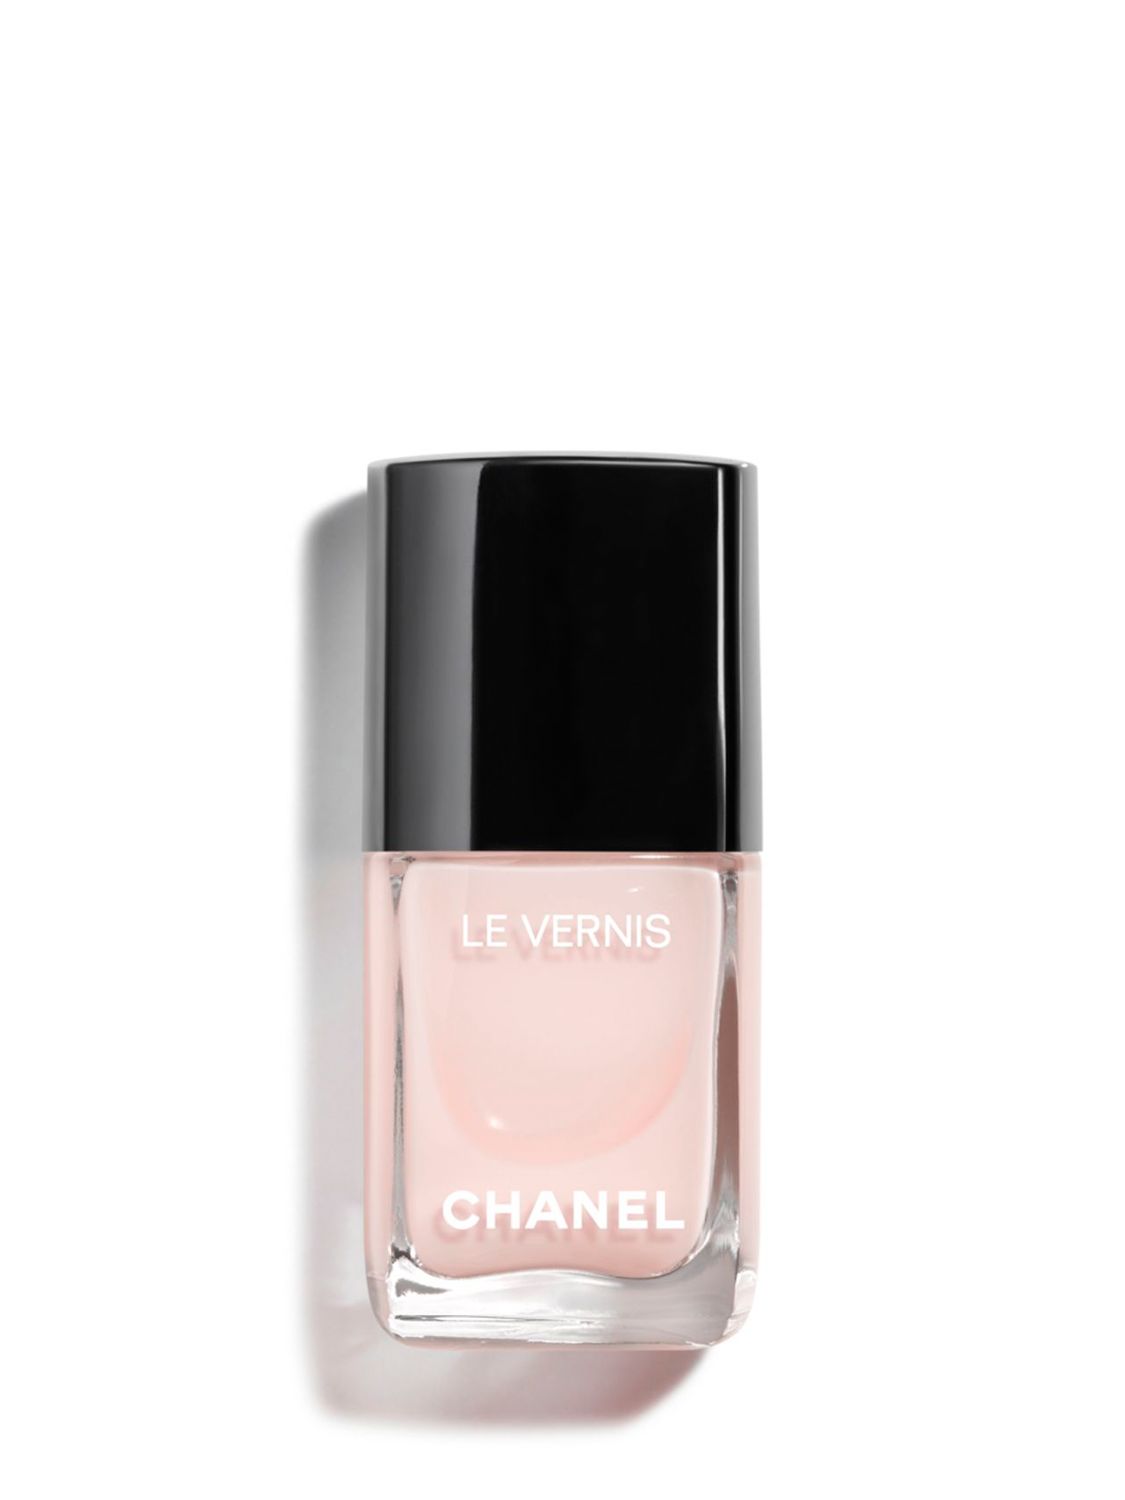 CHANEL Rouge Coco Baume, 928 Pink Delight at John Lewis & Partners